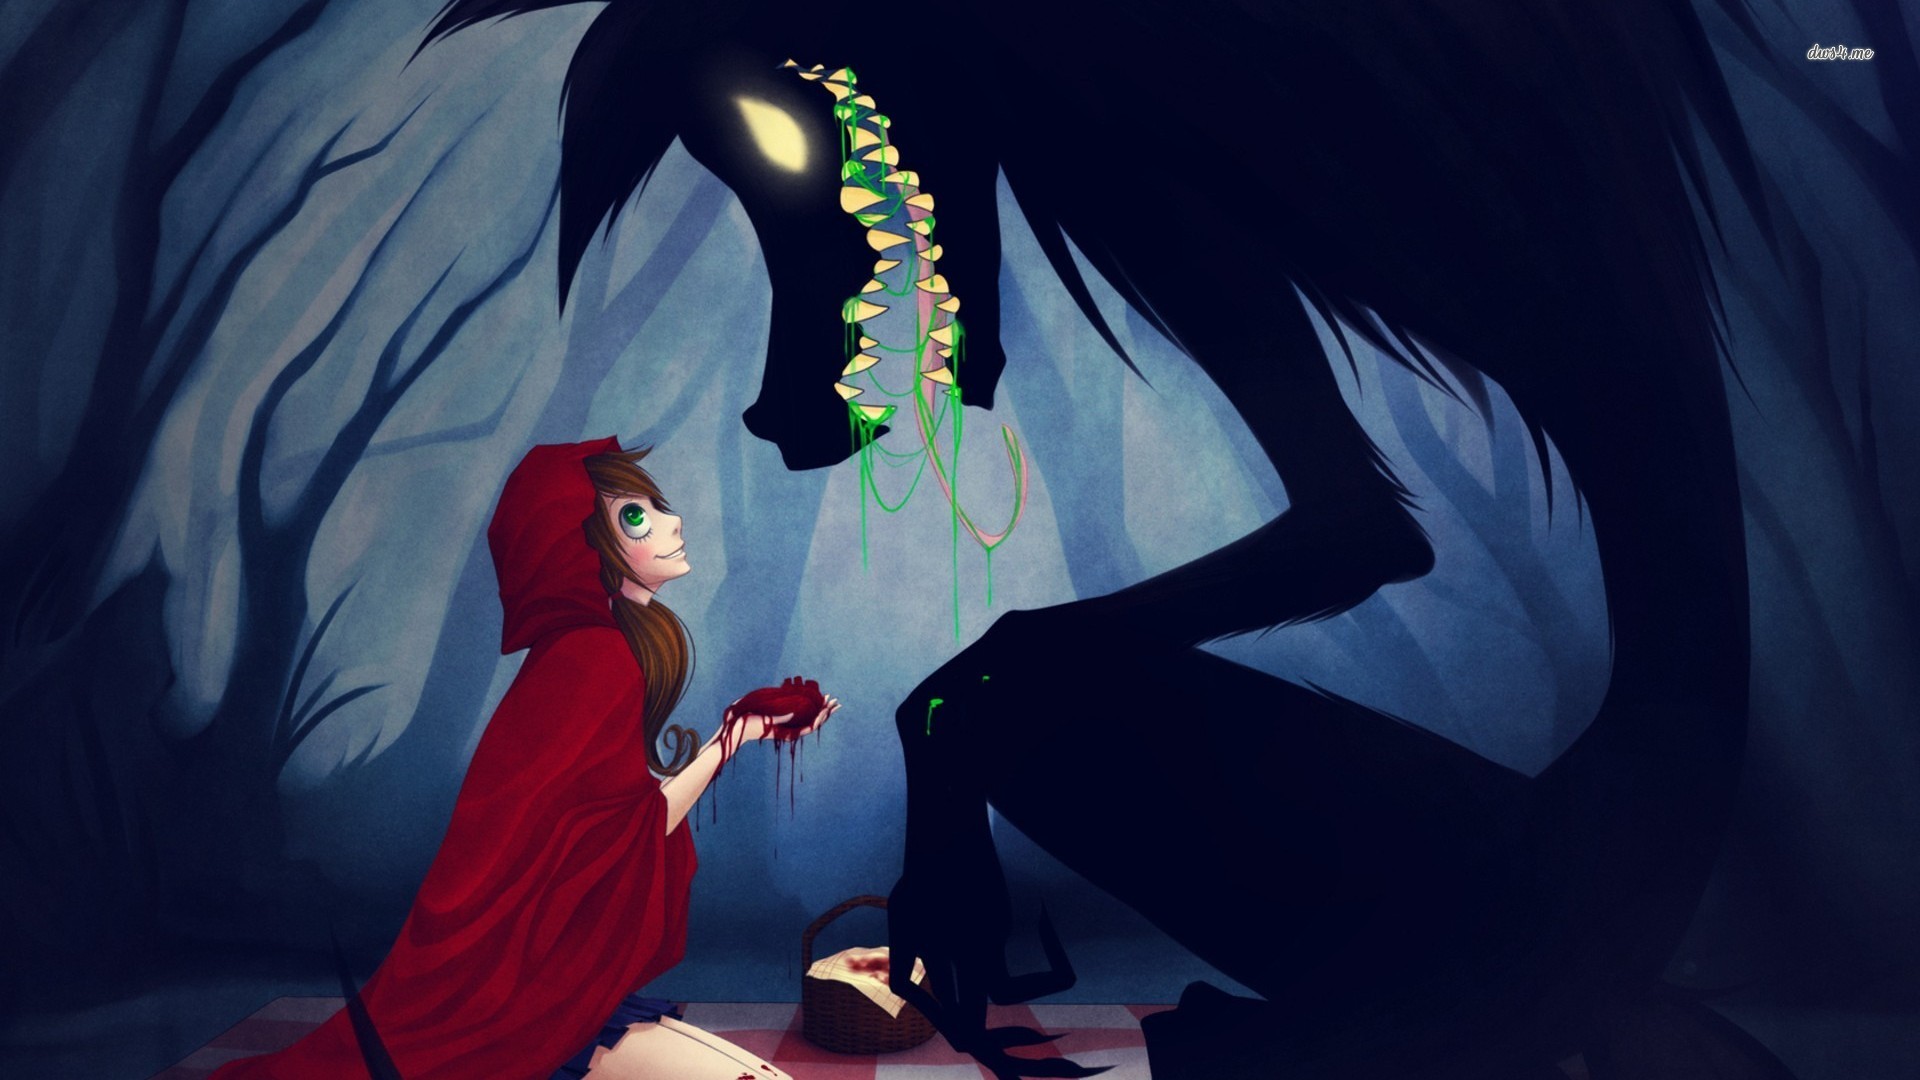 Creepy Red Riding Hood and the wolf wallpaper